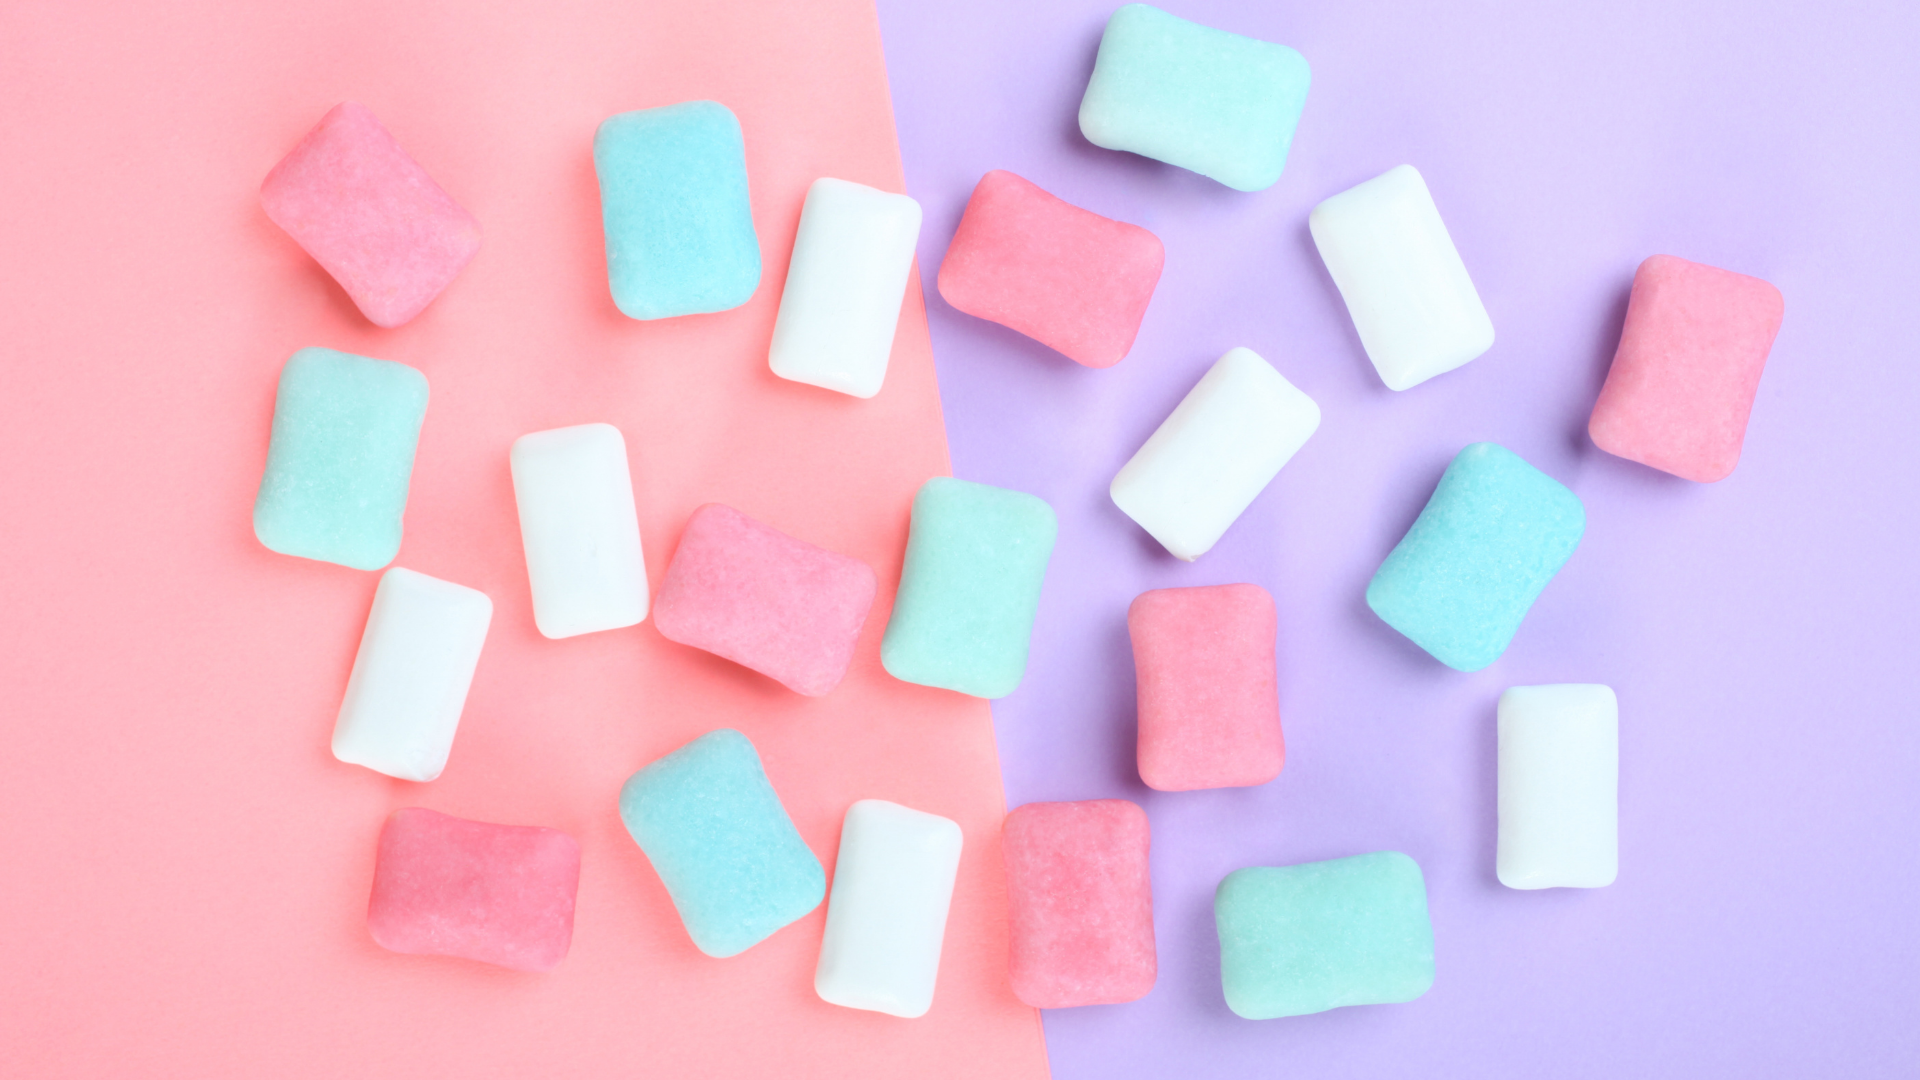 Is Chewing Gum Safe for Your Teeth?